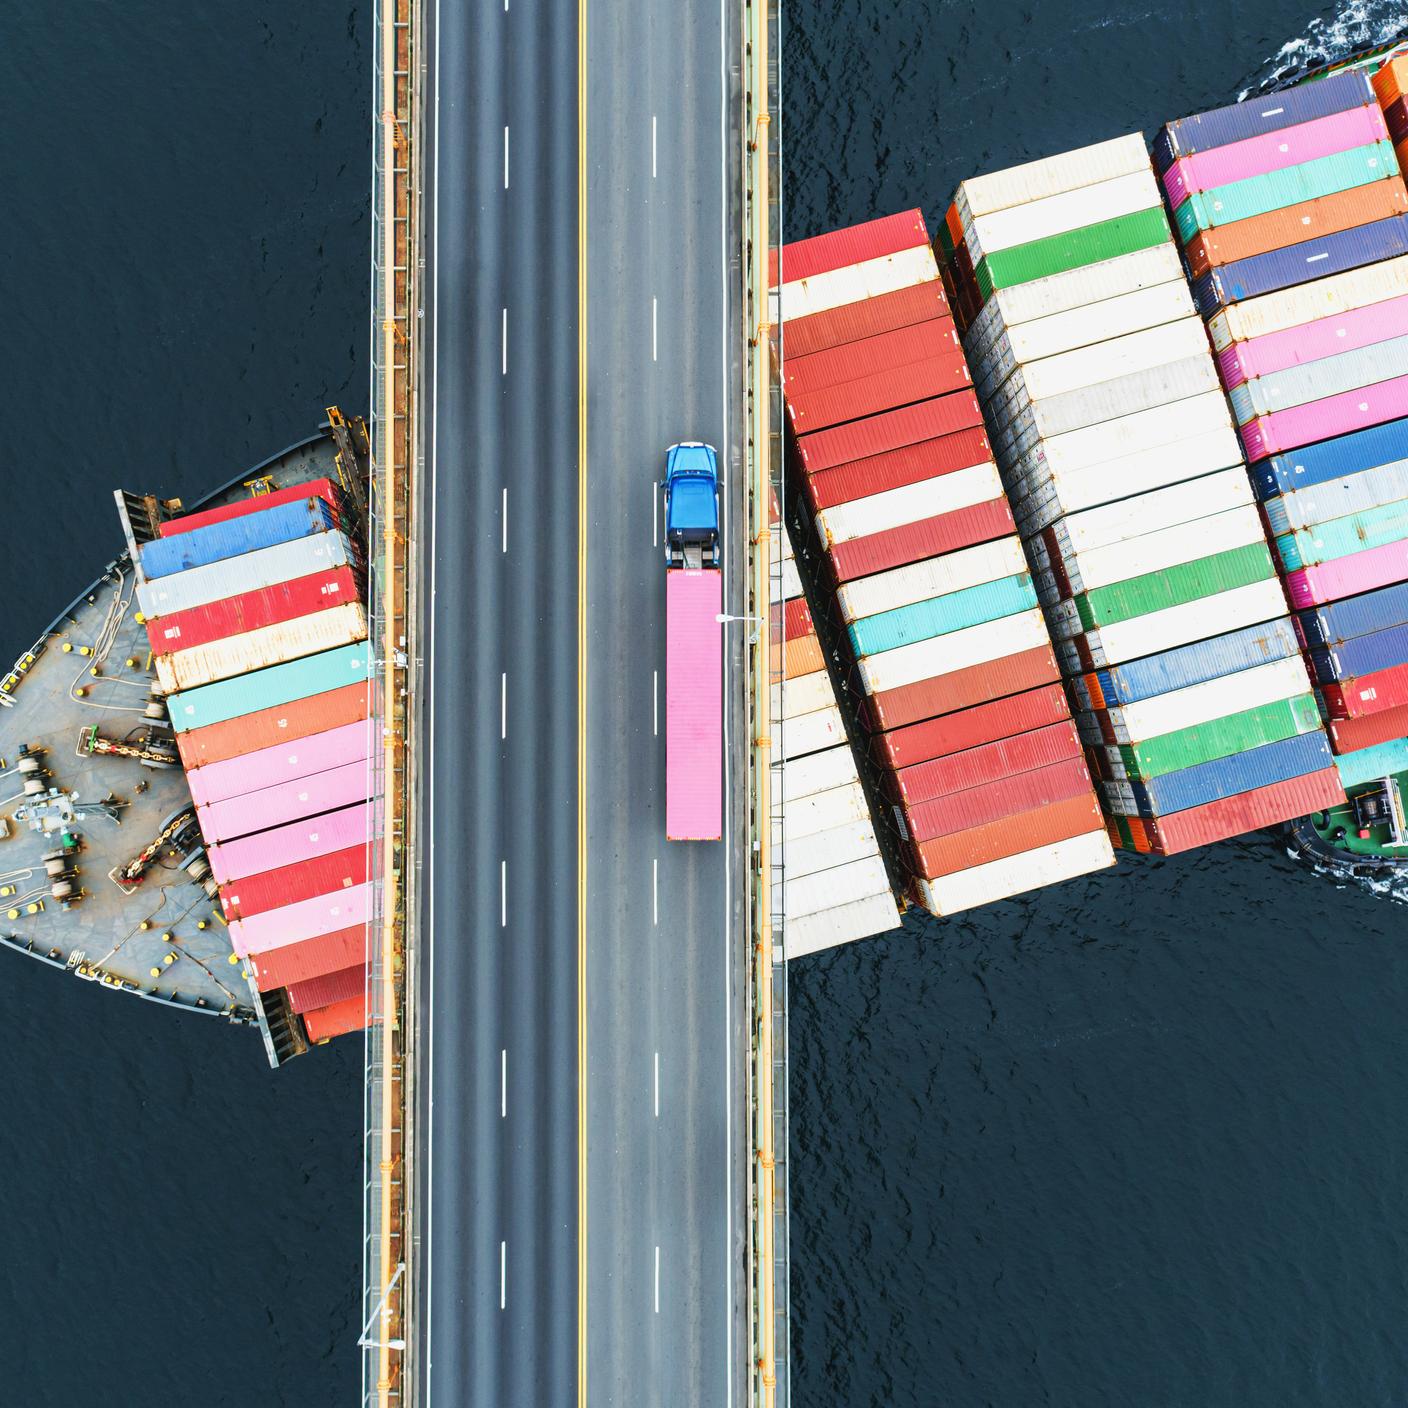 Aerial view of a container ship passing beneath a suspension bridge